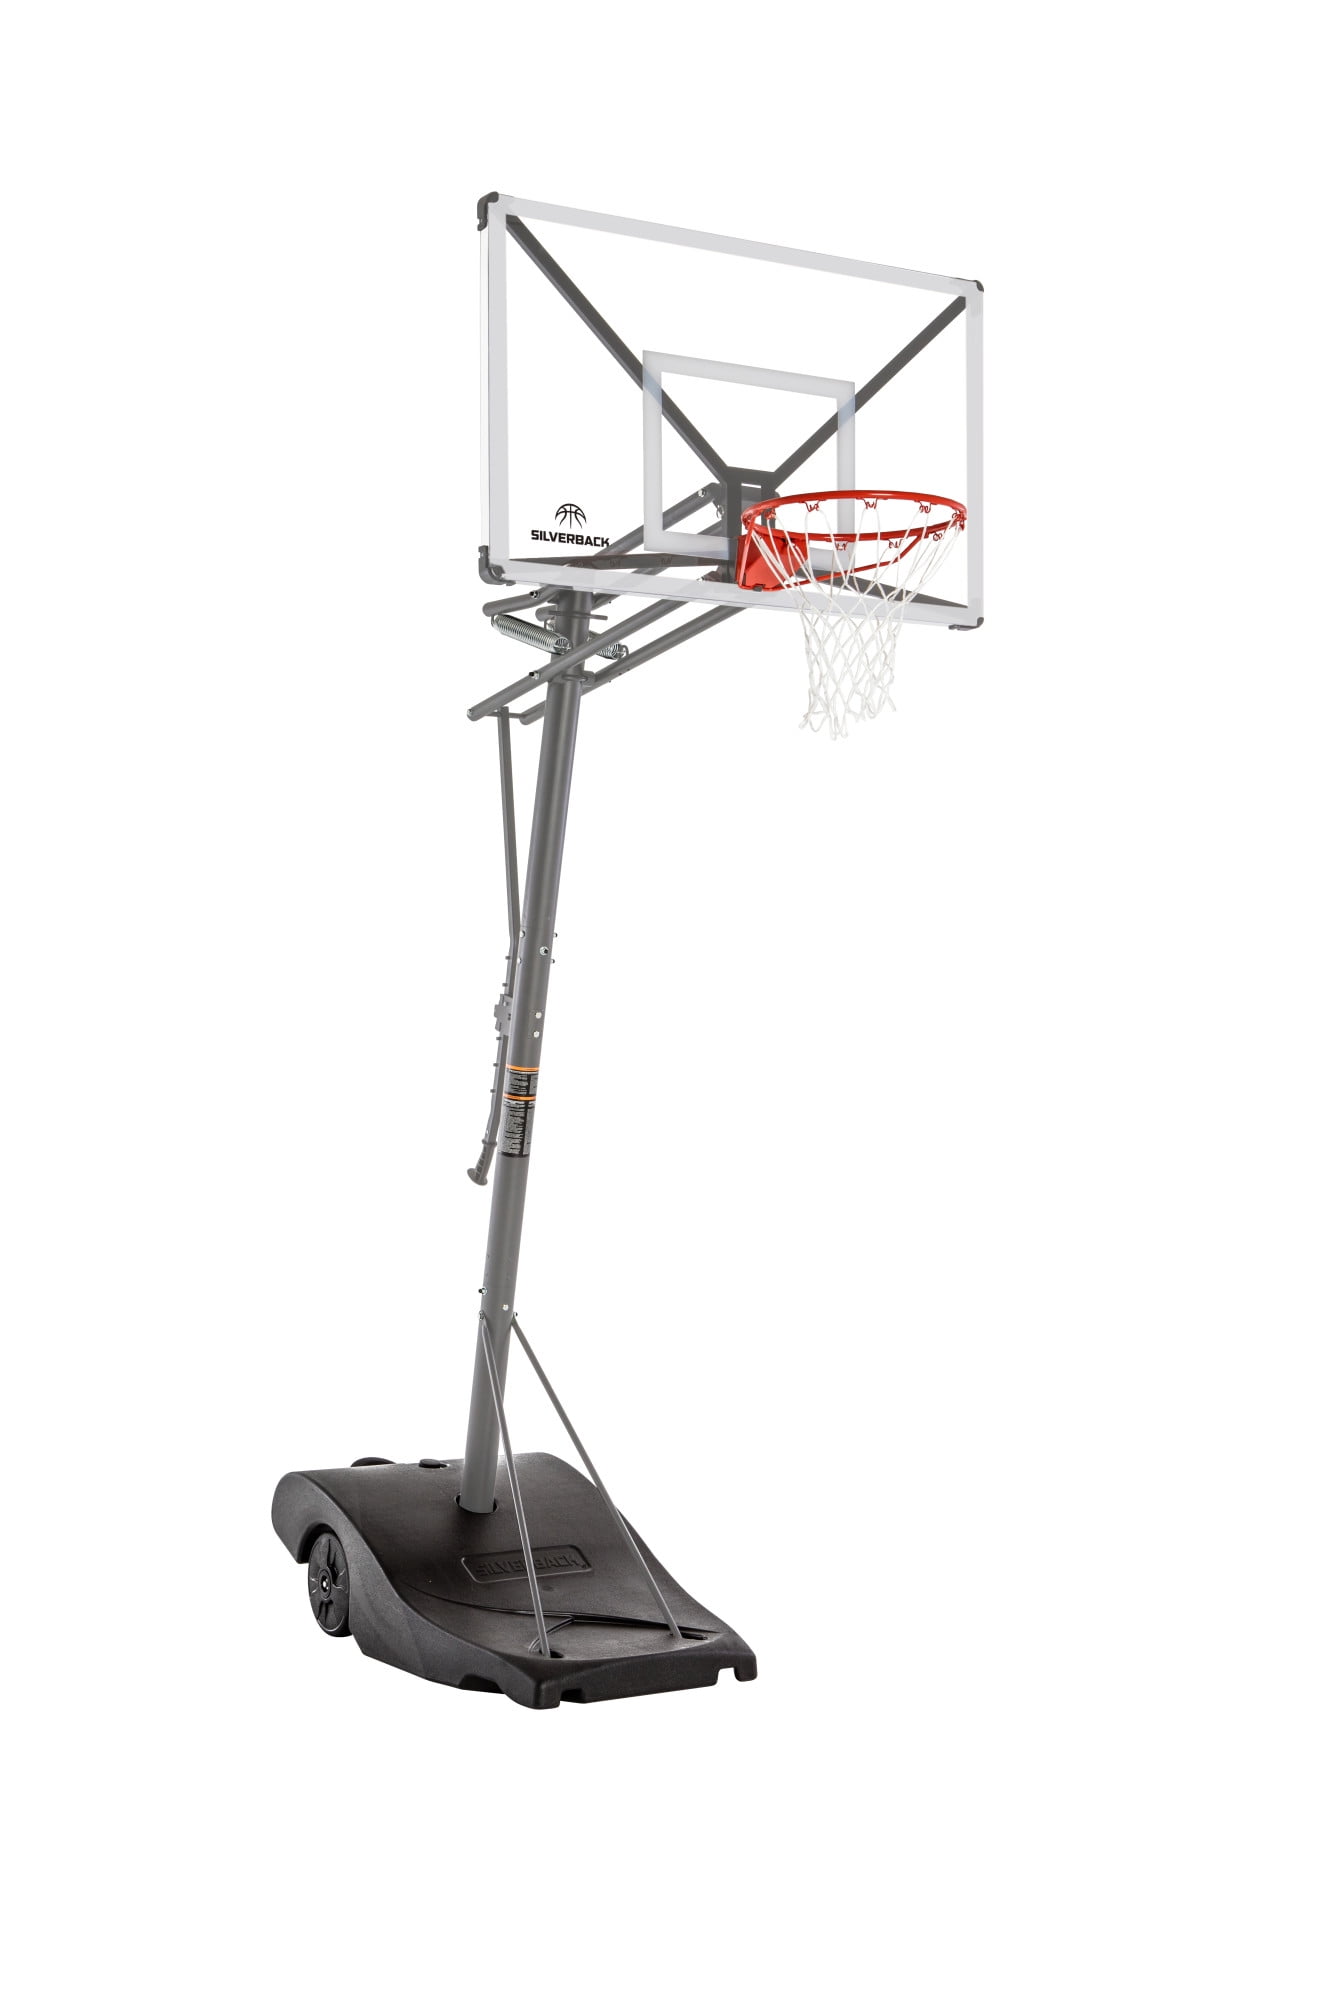 OneTwoFit Adjustable Basketball Hoop And Stand System Portable Basketball Goal 